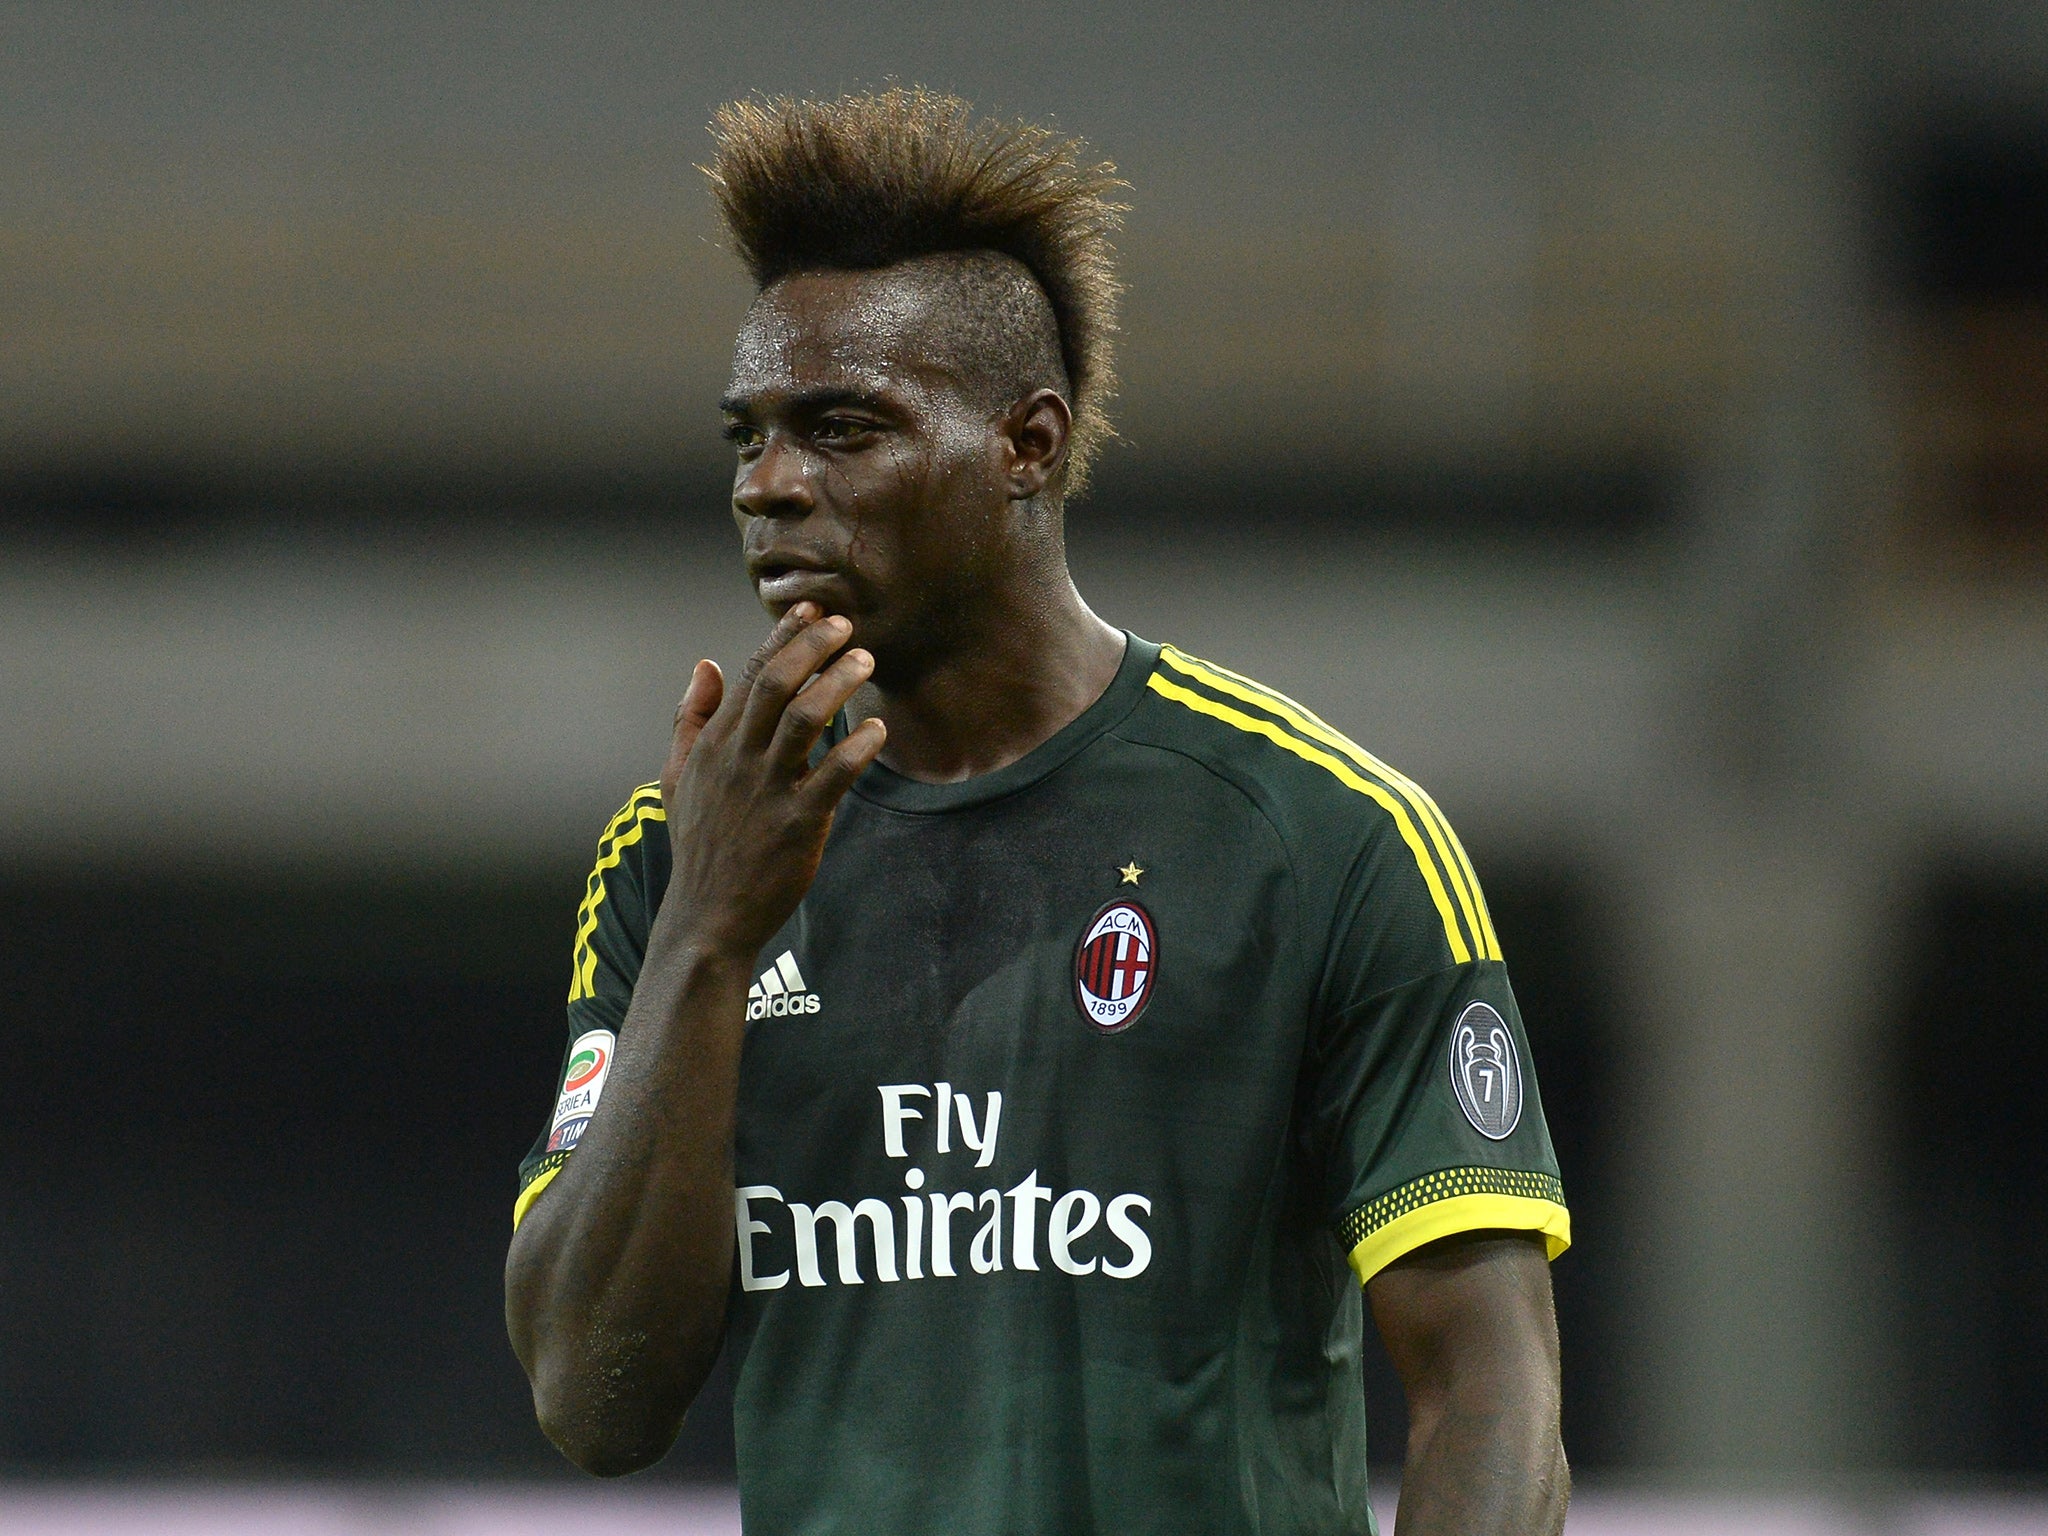 Mario Balotelli in action for Milan against Udinese